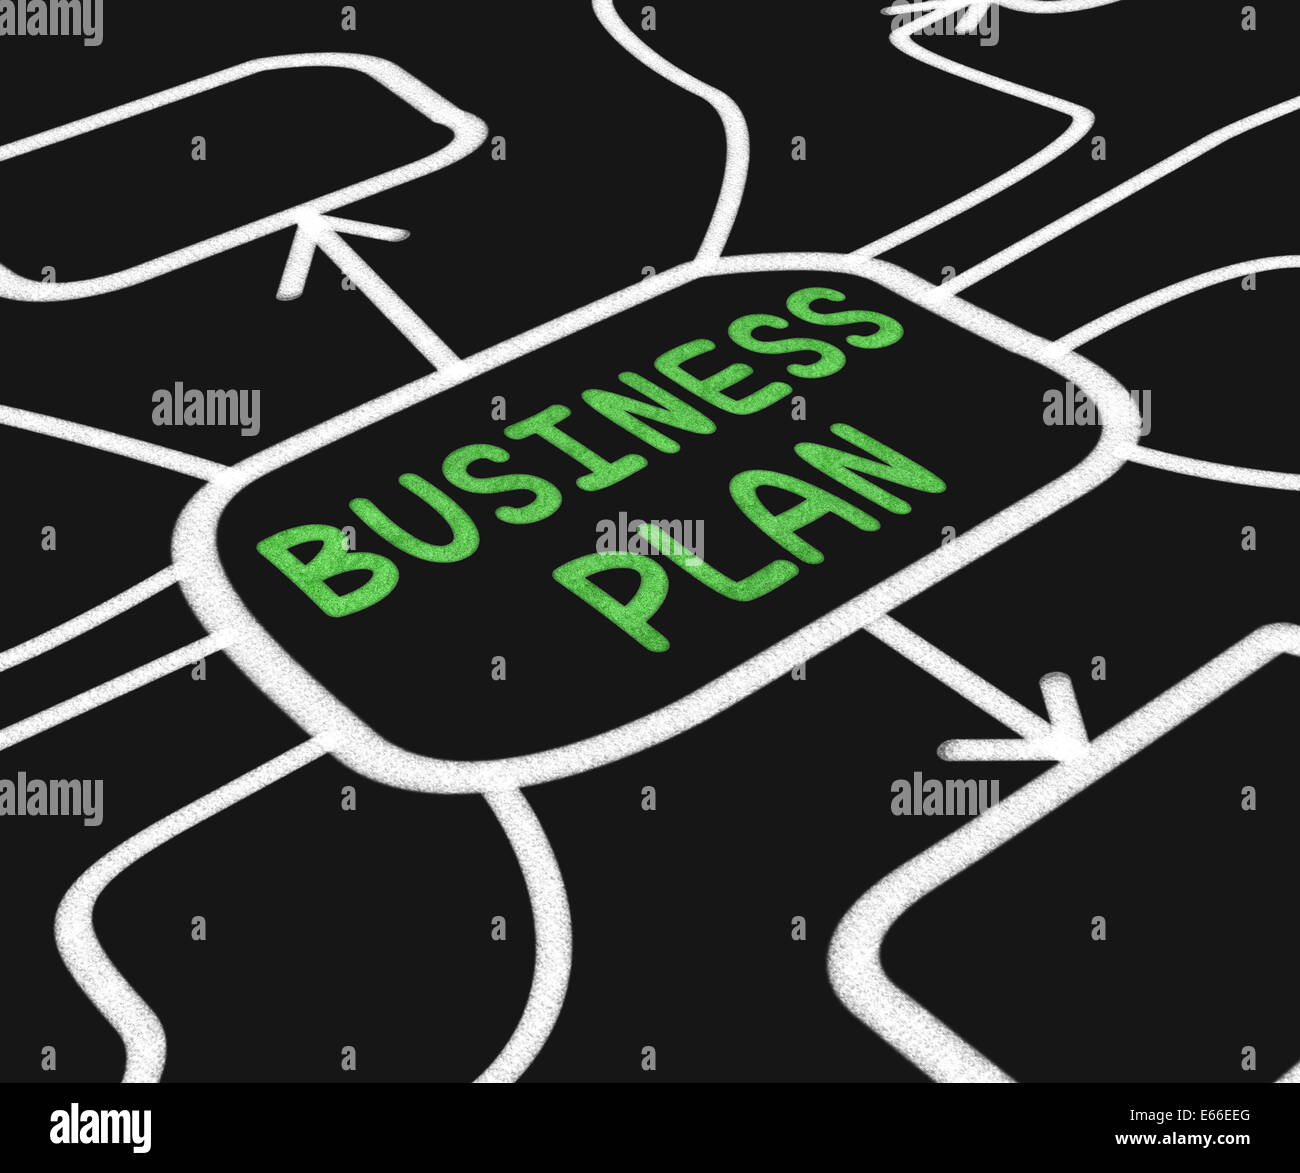 Business Plan Diagram Meaning Goals And Strategies For Company Stock Photo